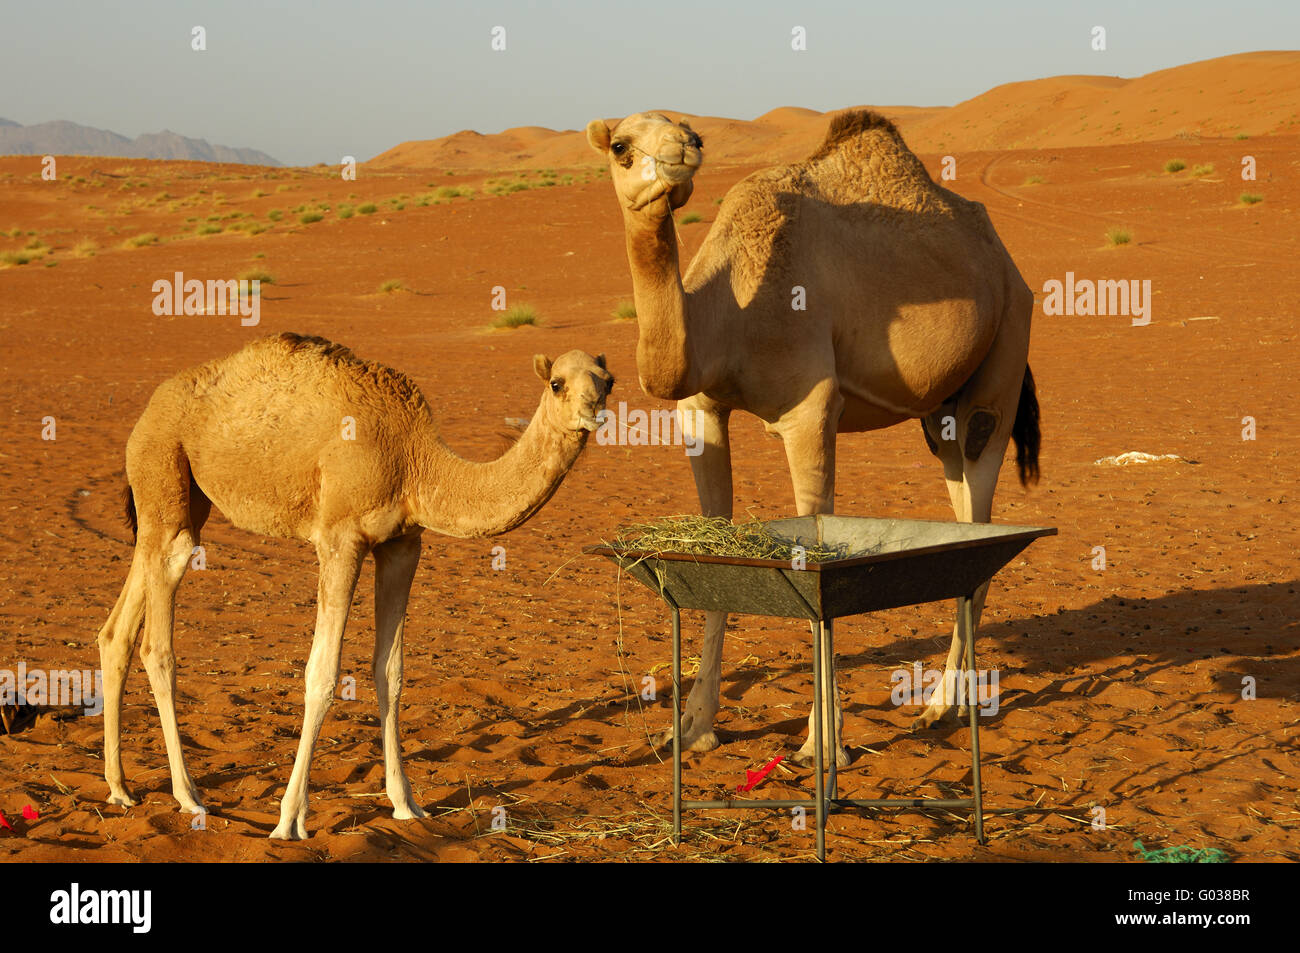 Female dromedary with a foal at a fodder place Stock Photo